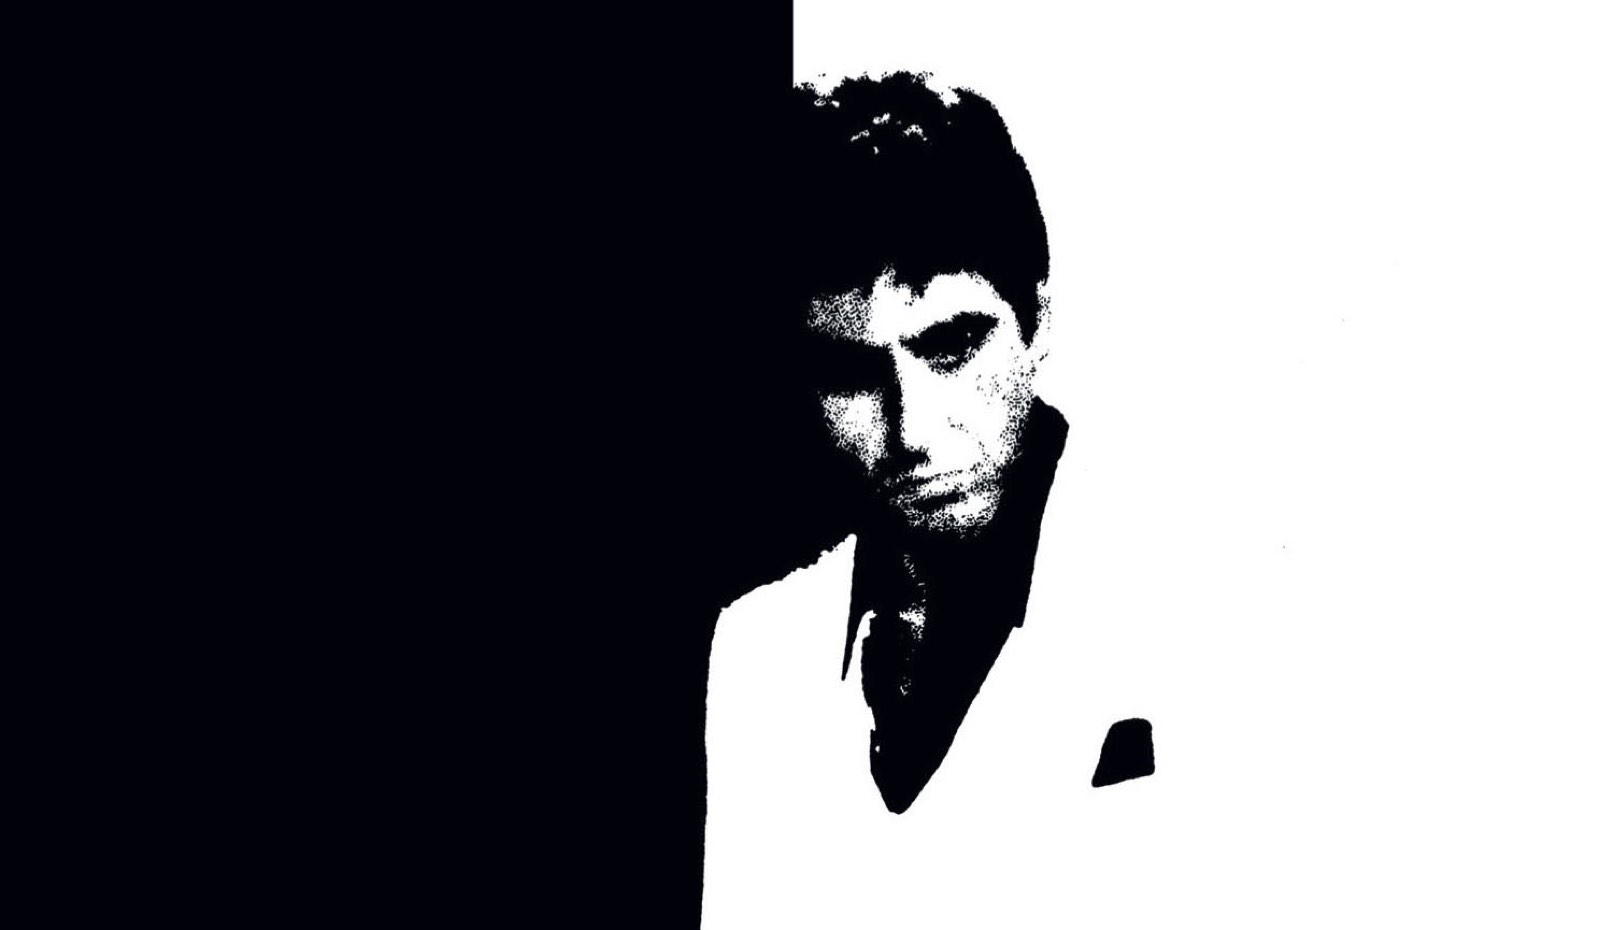 Say hello to Scarface in 40th anniversary 4K